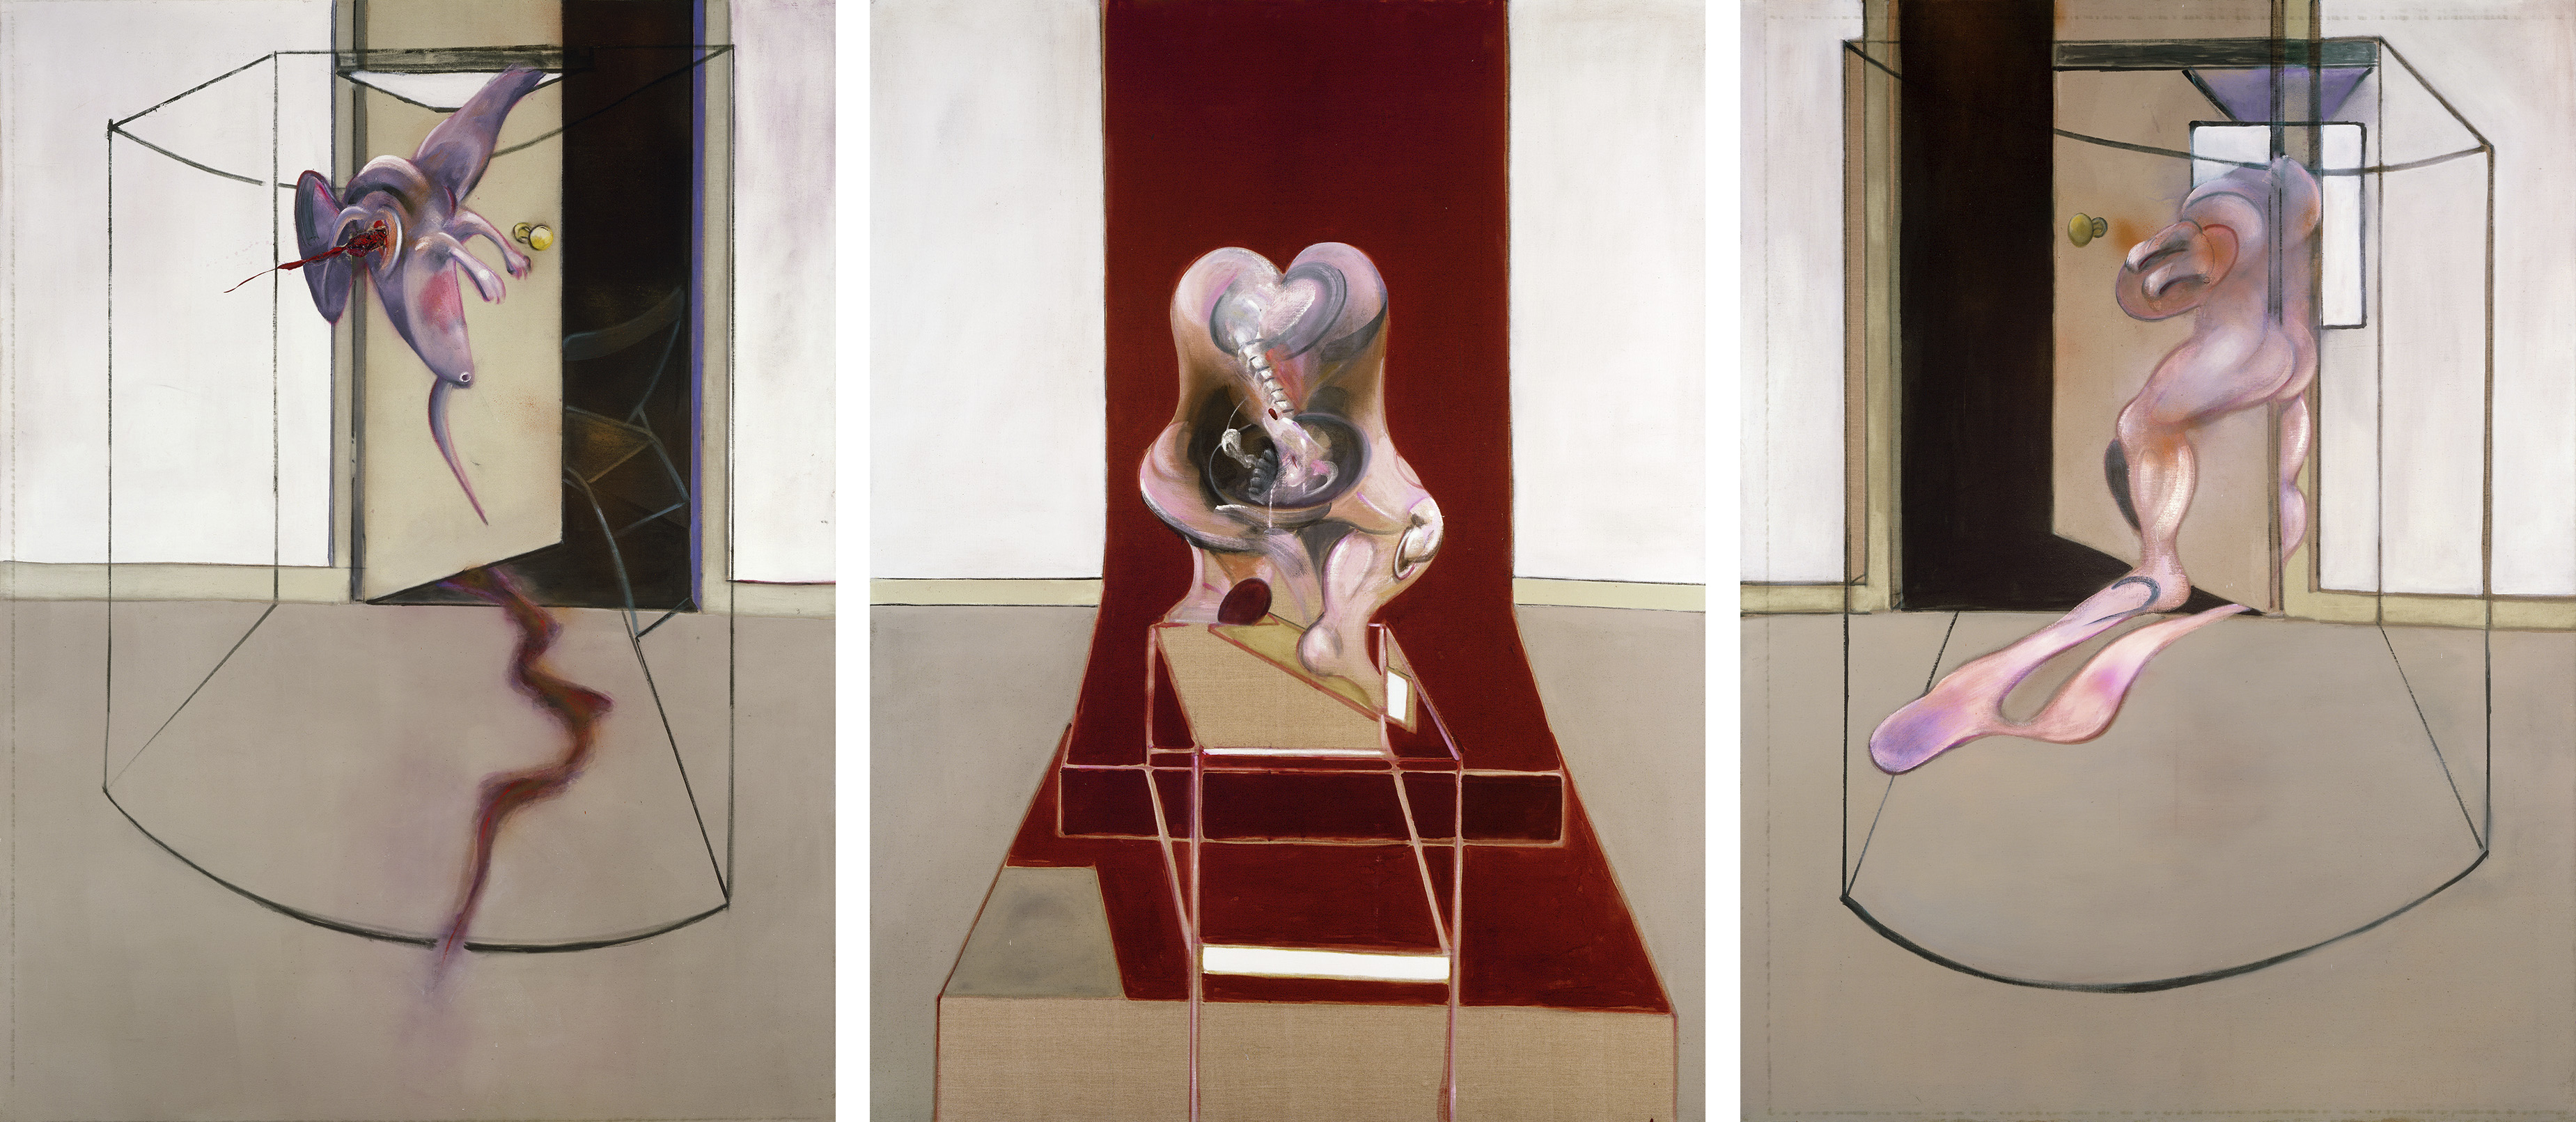 Francis Bacon, Triptych, Inspired by the Oresteia of Aeschylus, 1981. Oil on canvas. CR number 81-03. © The Estate of Francis Bacon / DACS London 2020.  All rights reserved.